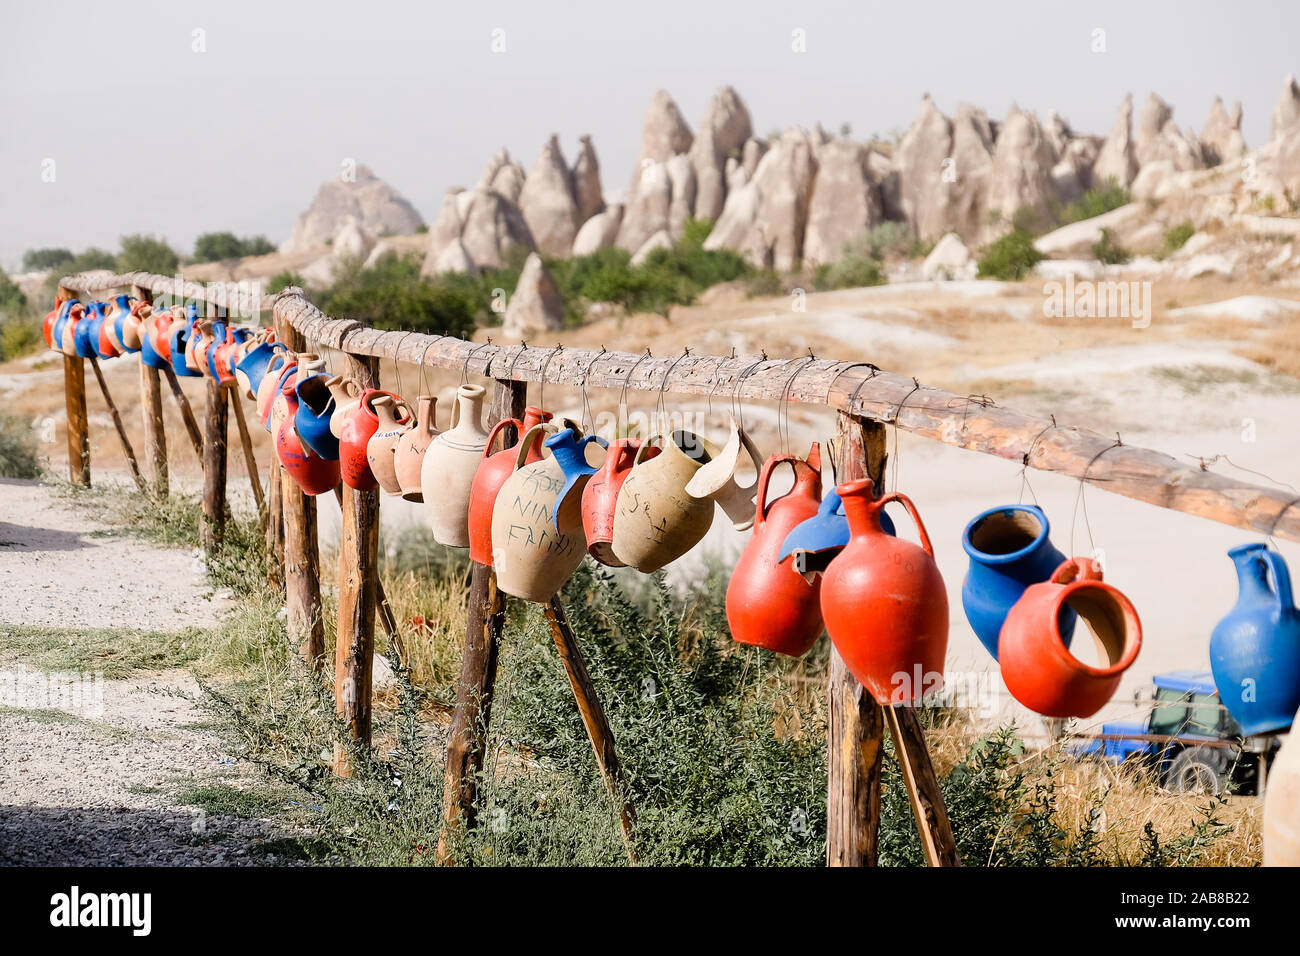 Pots and jugs hanging on a fence in Cappadocia Stock Photo